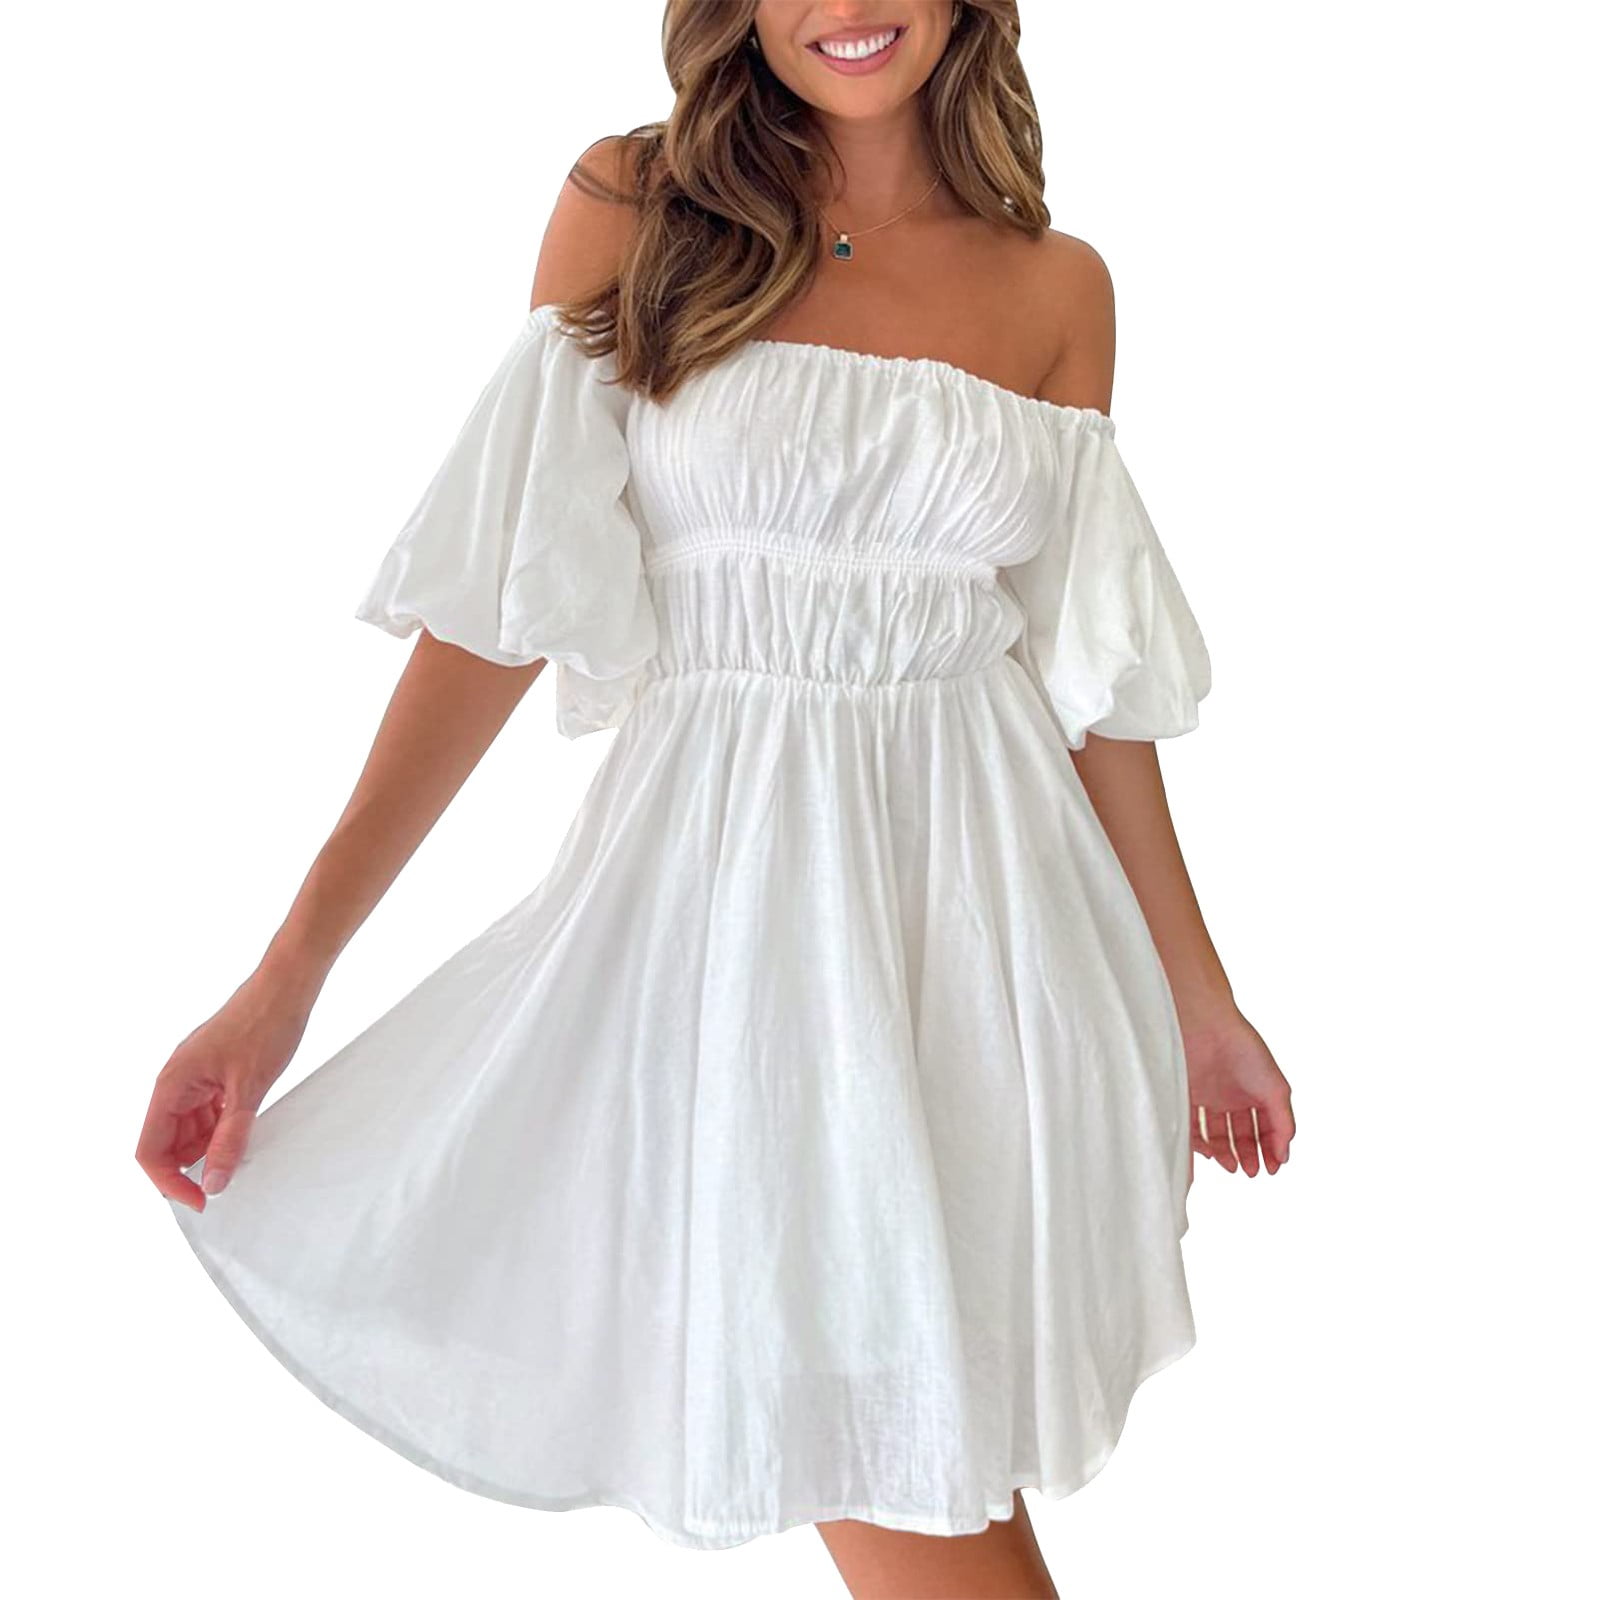 white going out dresses